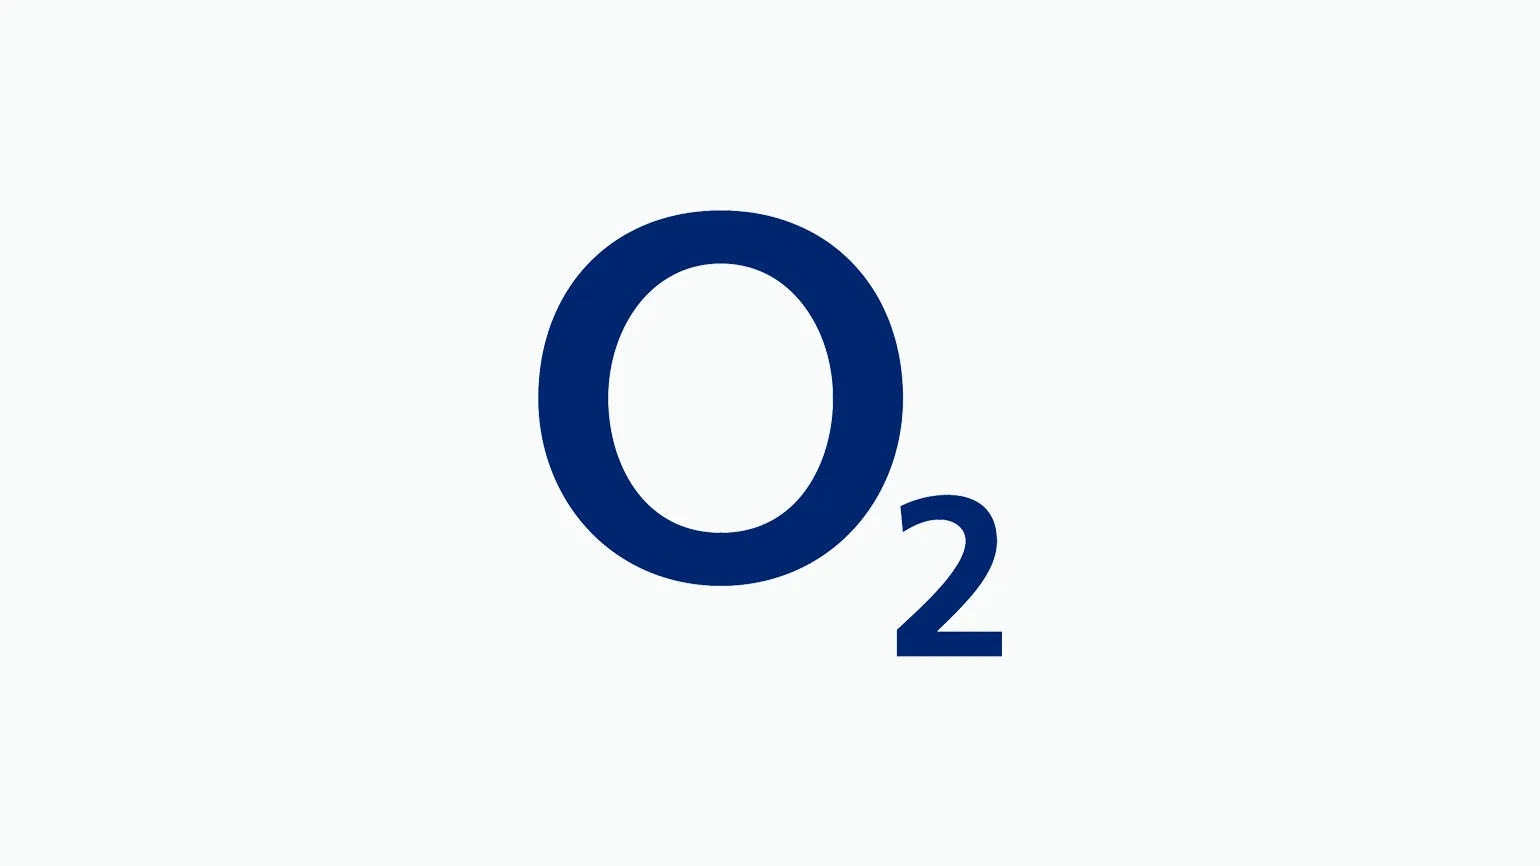 Upgrading your phone early with O2